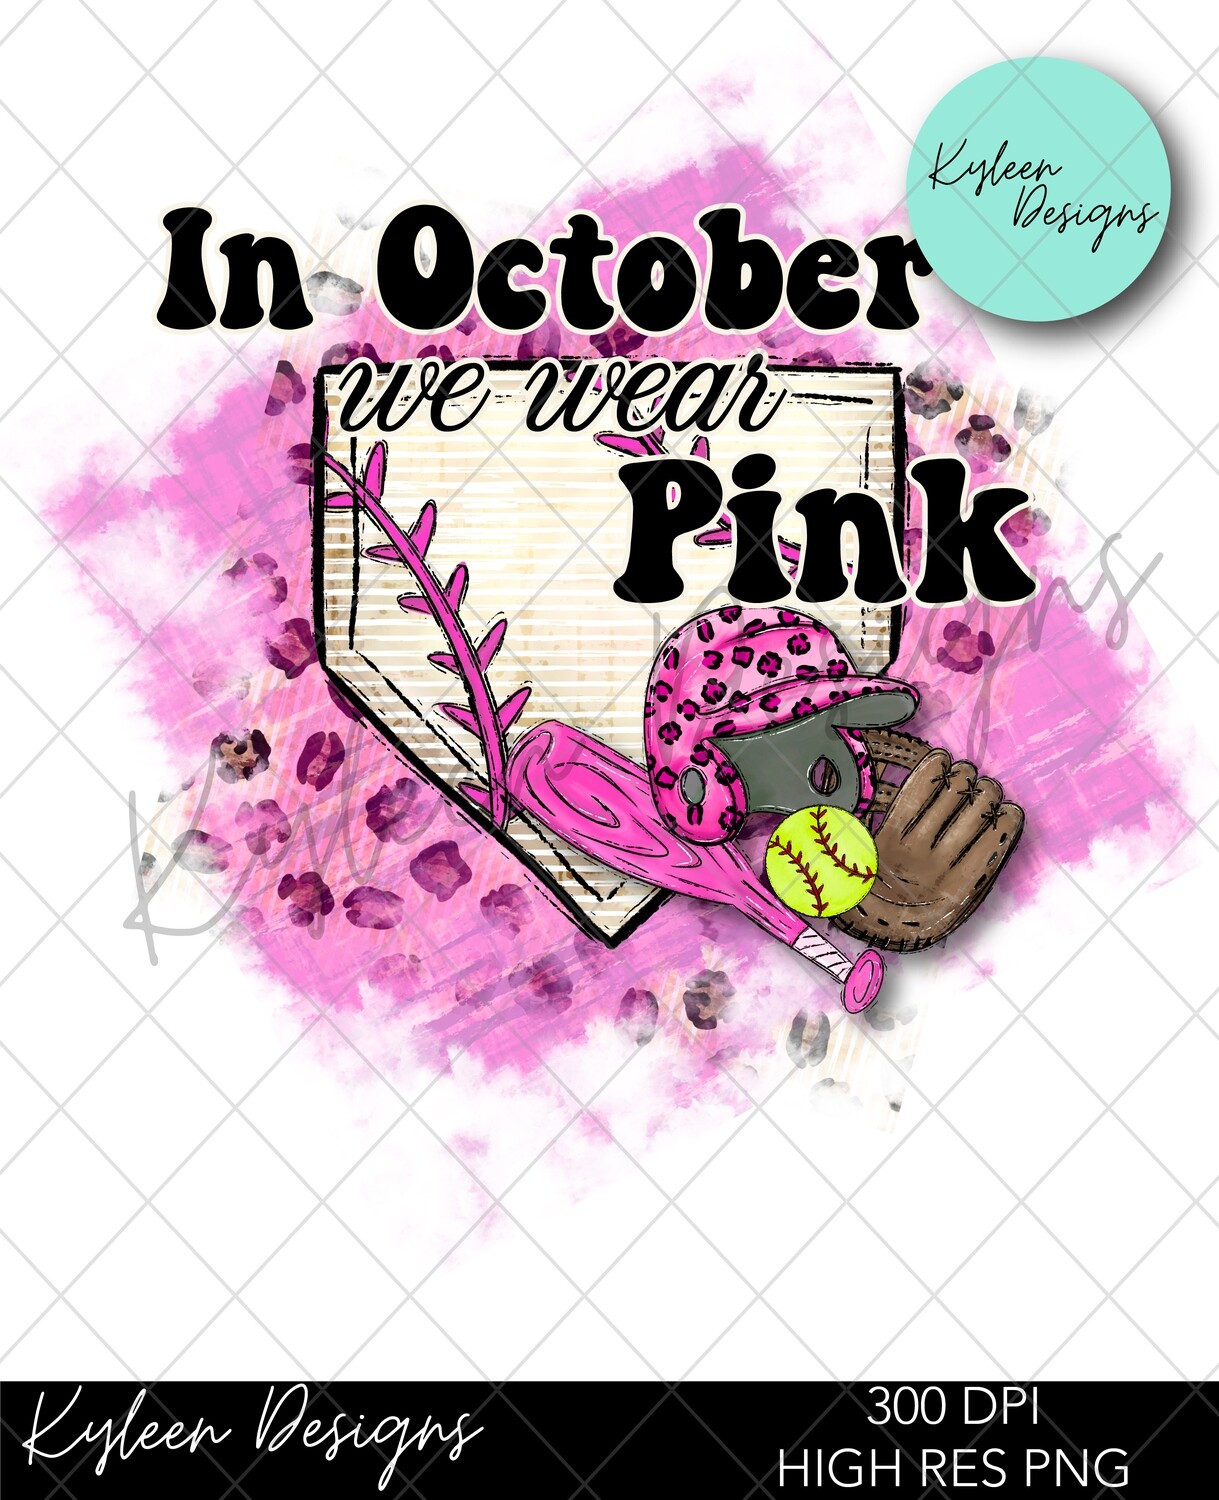 In October we wear pink SOFTBALL high res PNG